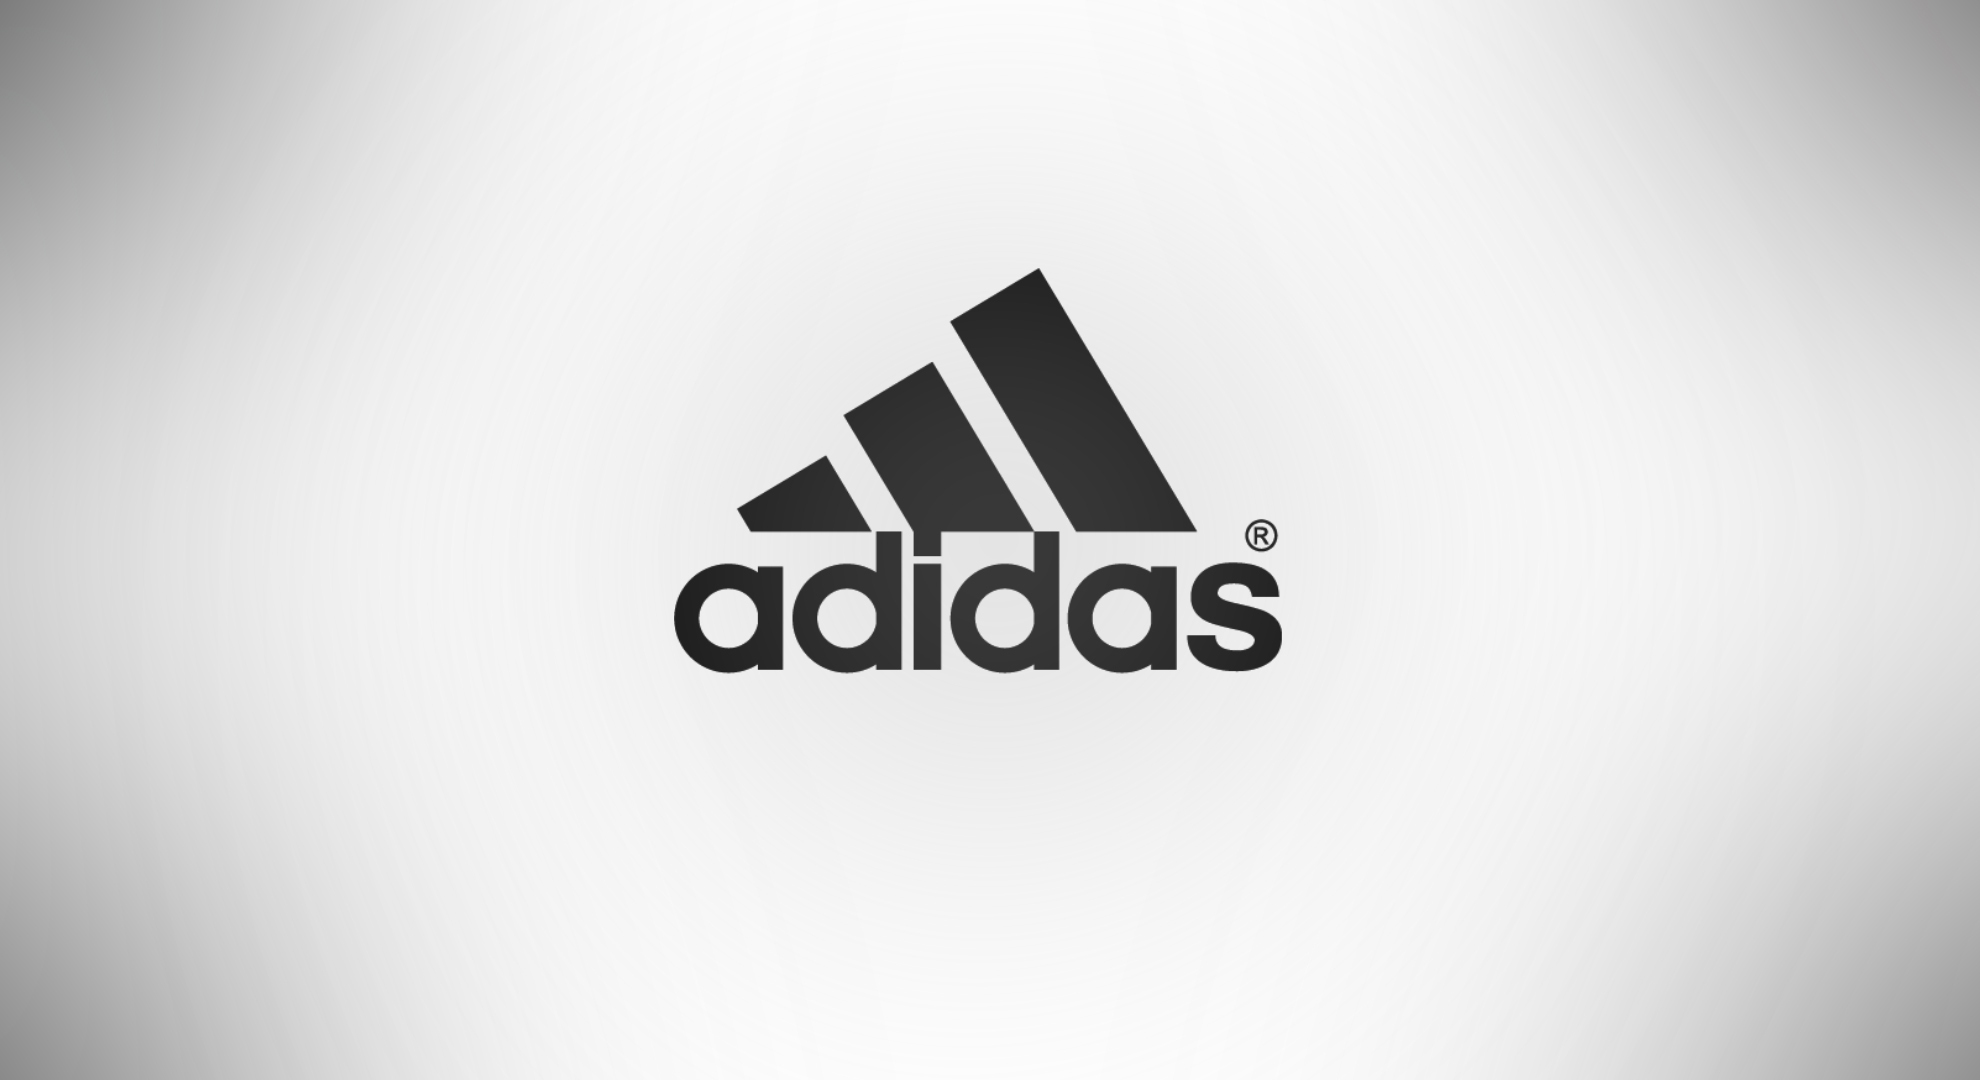 Free Download 31 Adidas Hd Wallpapers Background Images 1980x1080 For Your Desktop Mobile Tablet Explore 22 Black And White Adidas Hd Wallpaper Black And White Adidas Hd Wallpaper Black